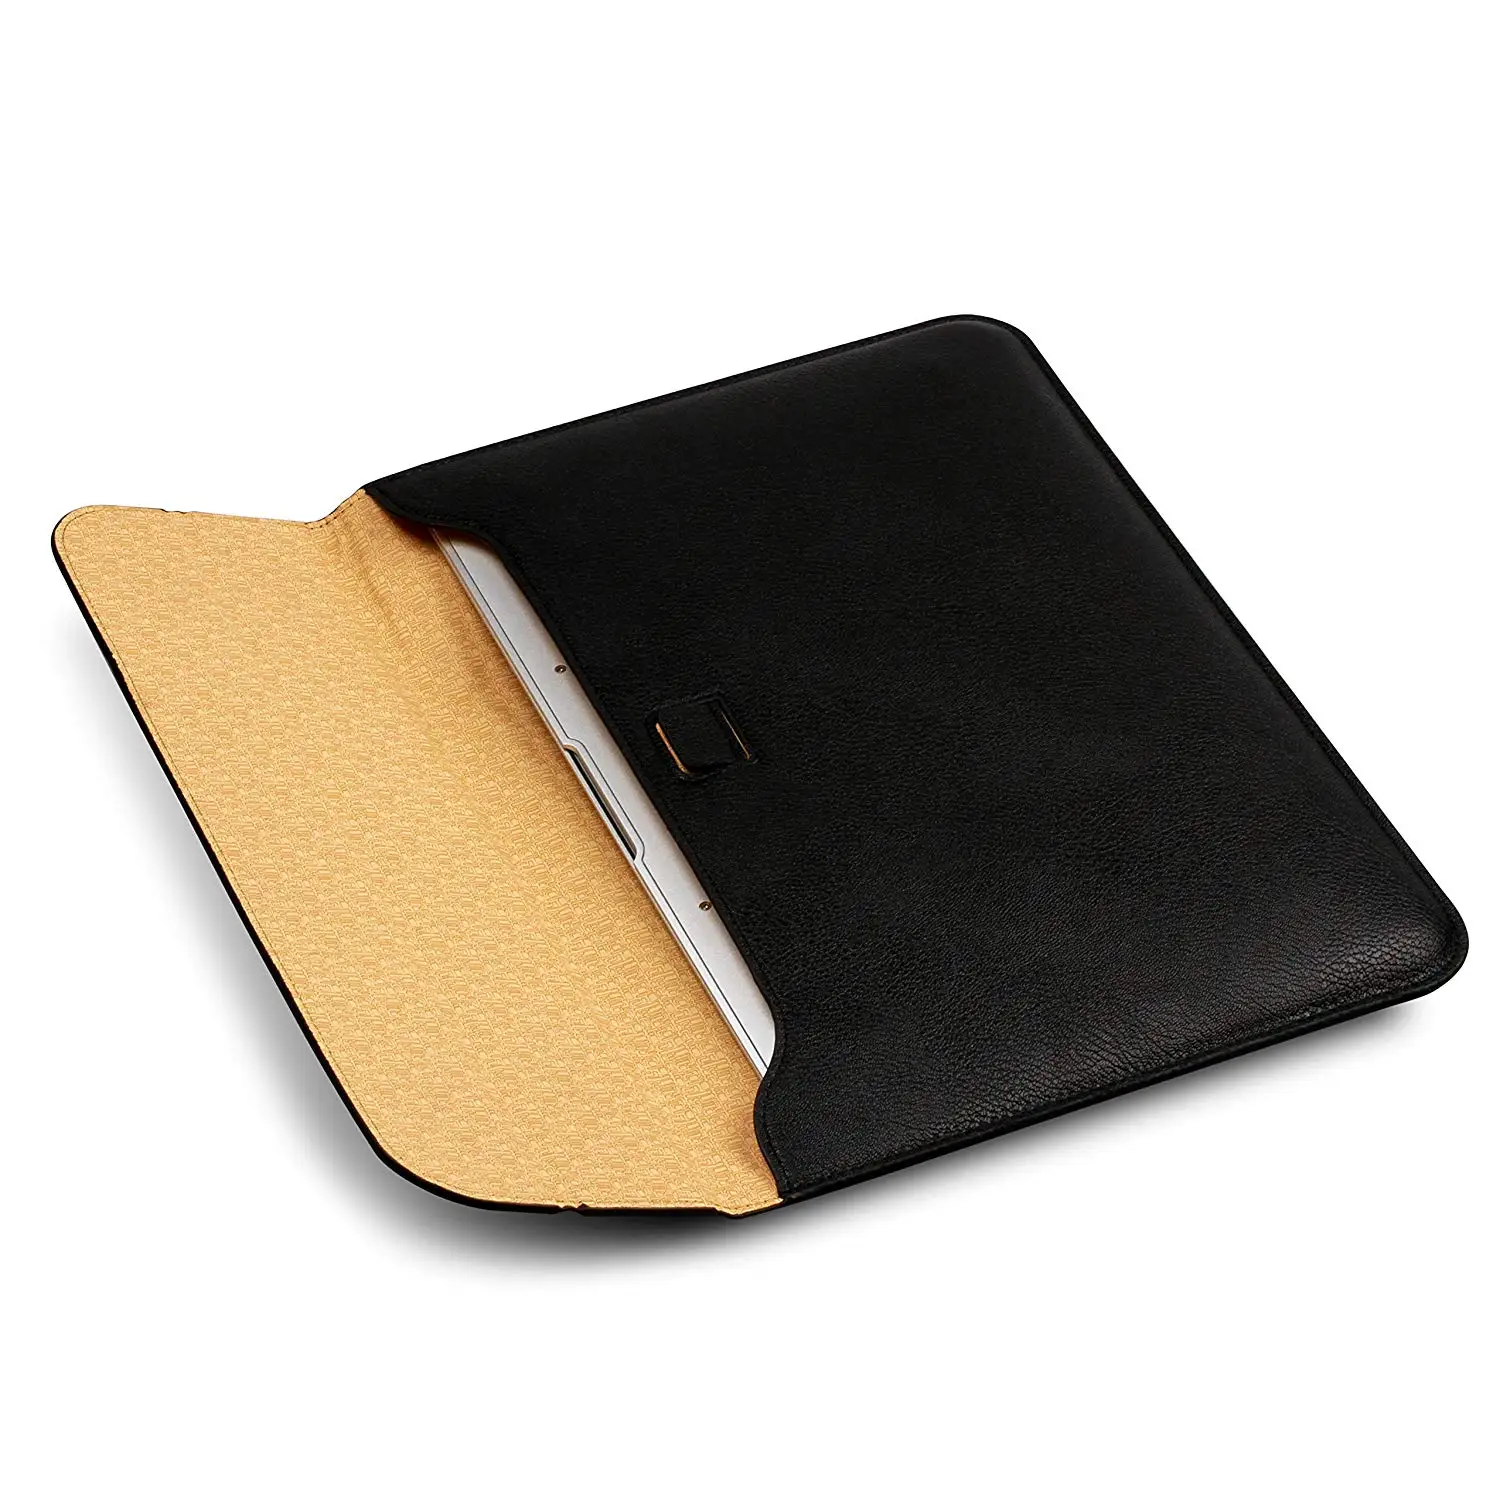 Portable Protective Leather Laptop Case Sleeve Laptop Cover Bag With ...